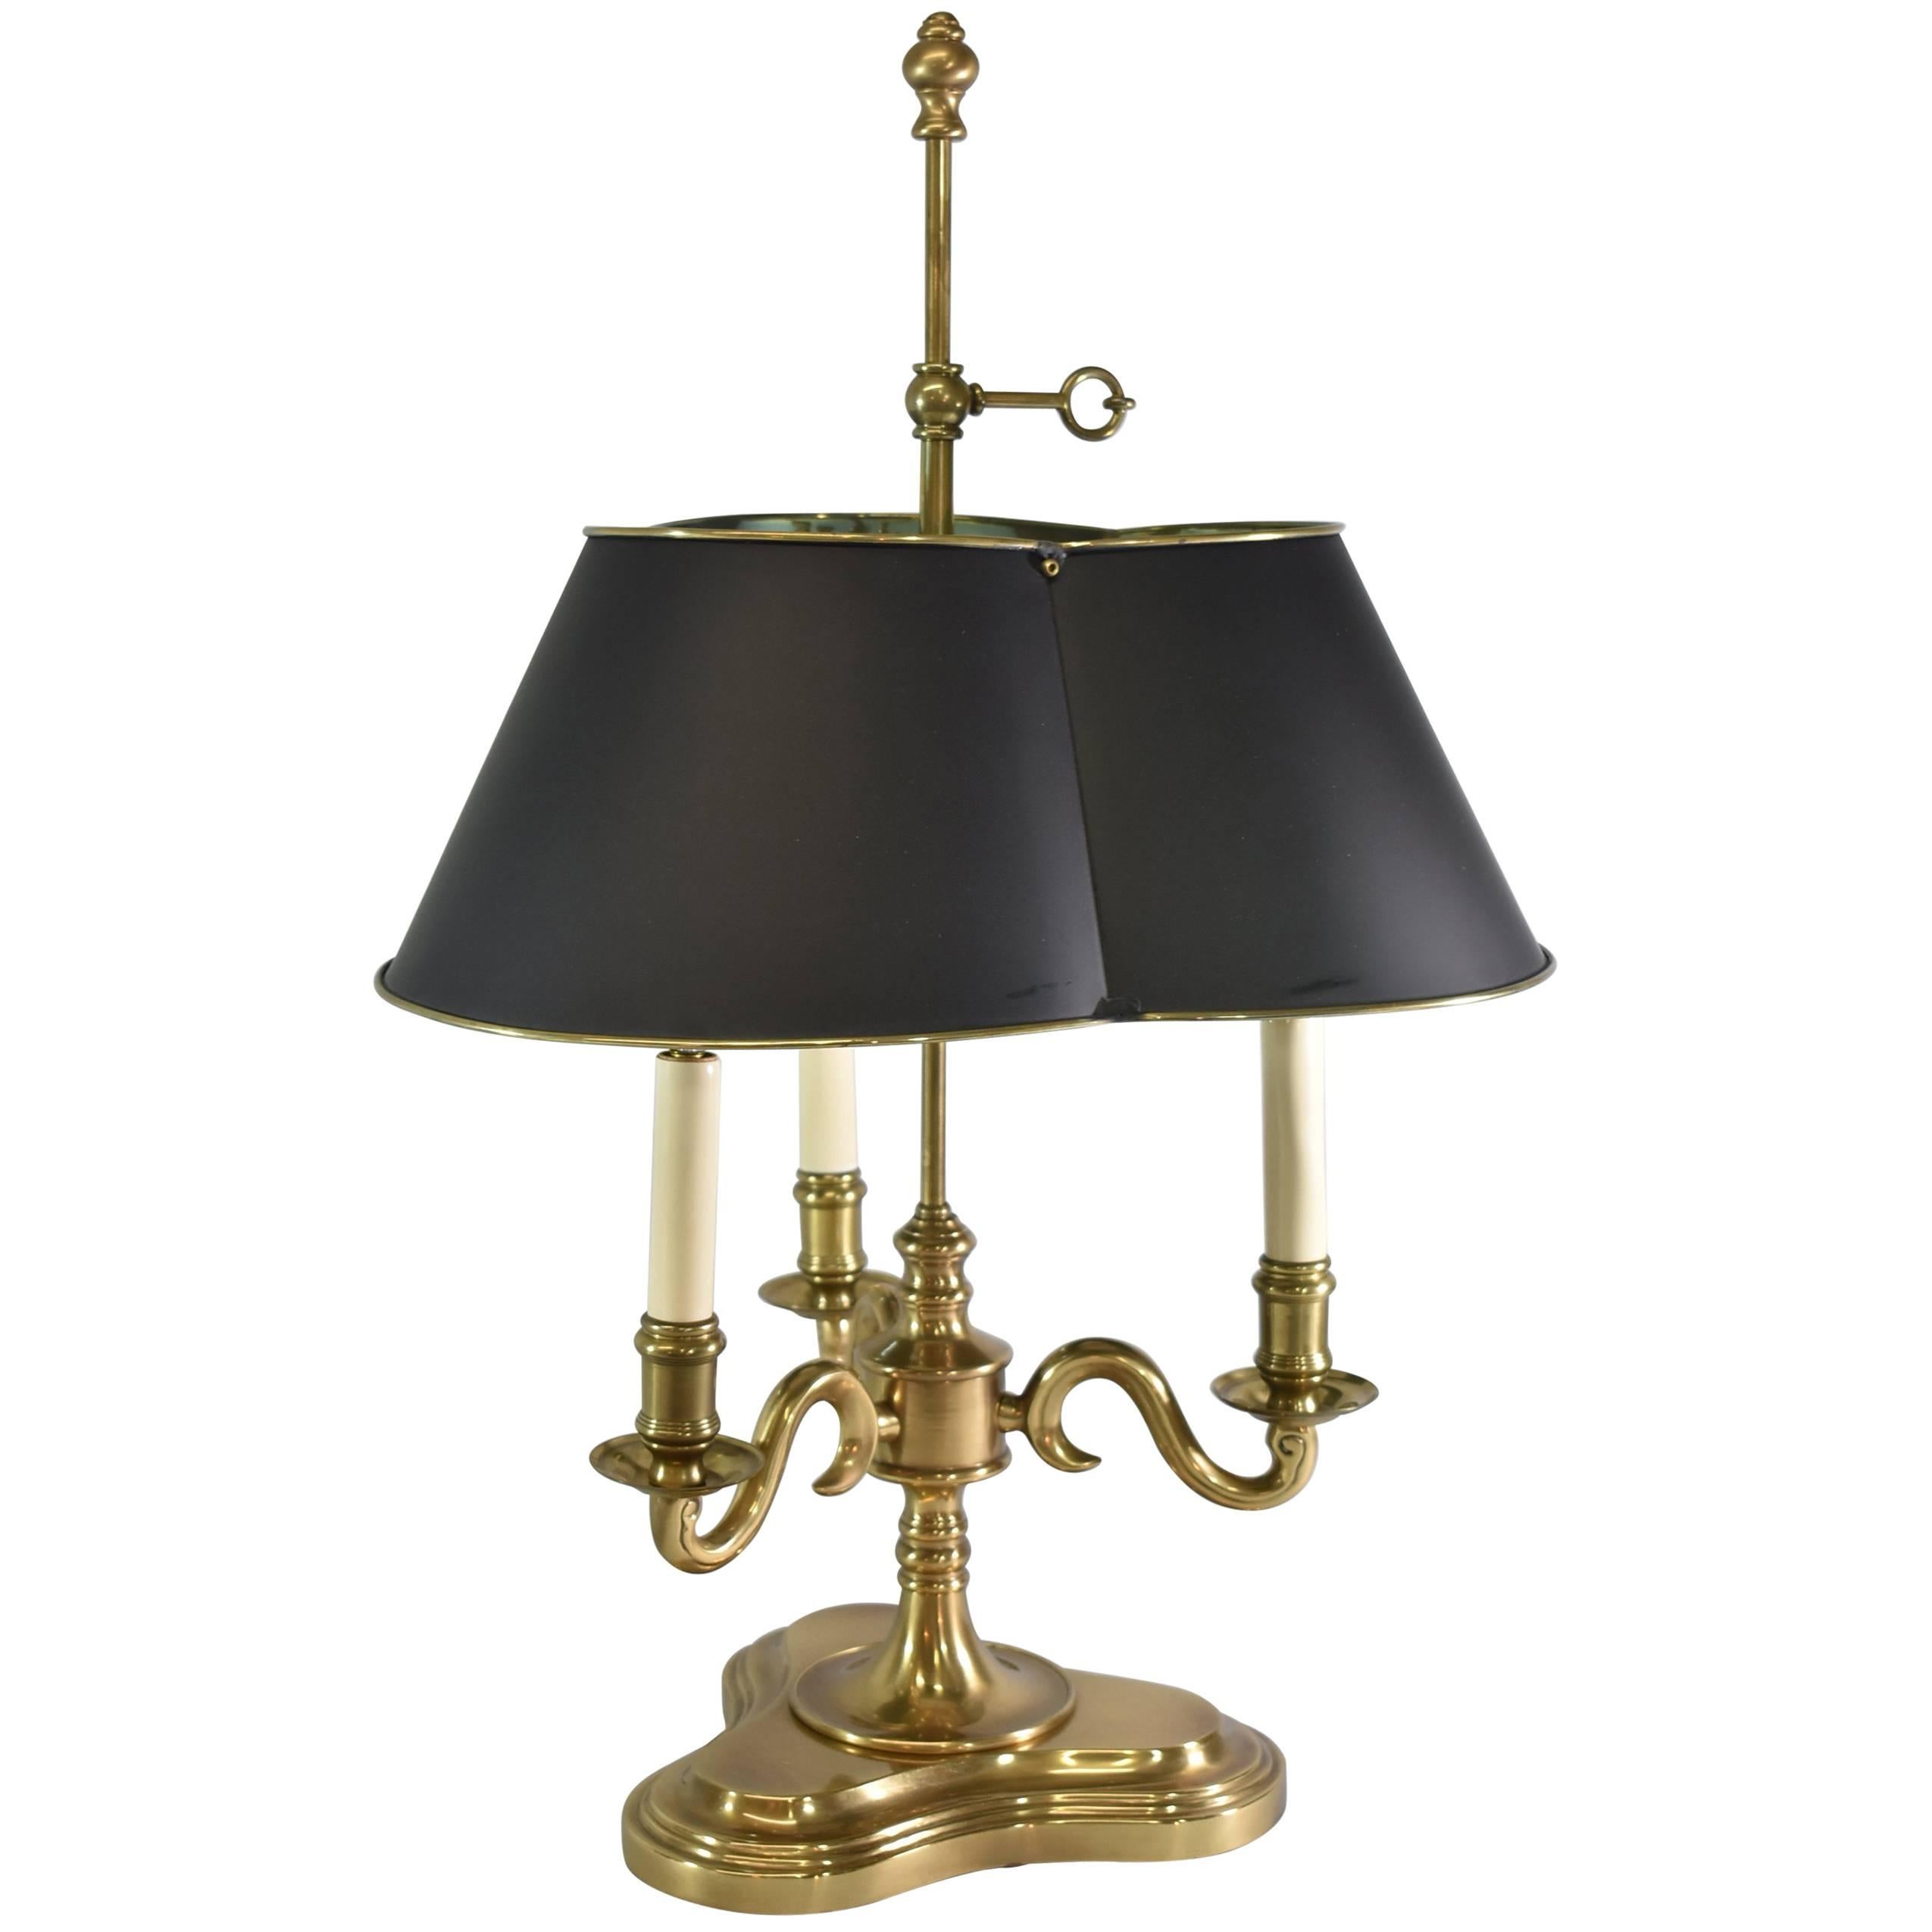 French Empire Style Brass Bouillotte Table Lamp by Frederick Cooper